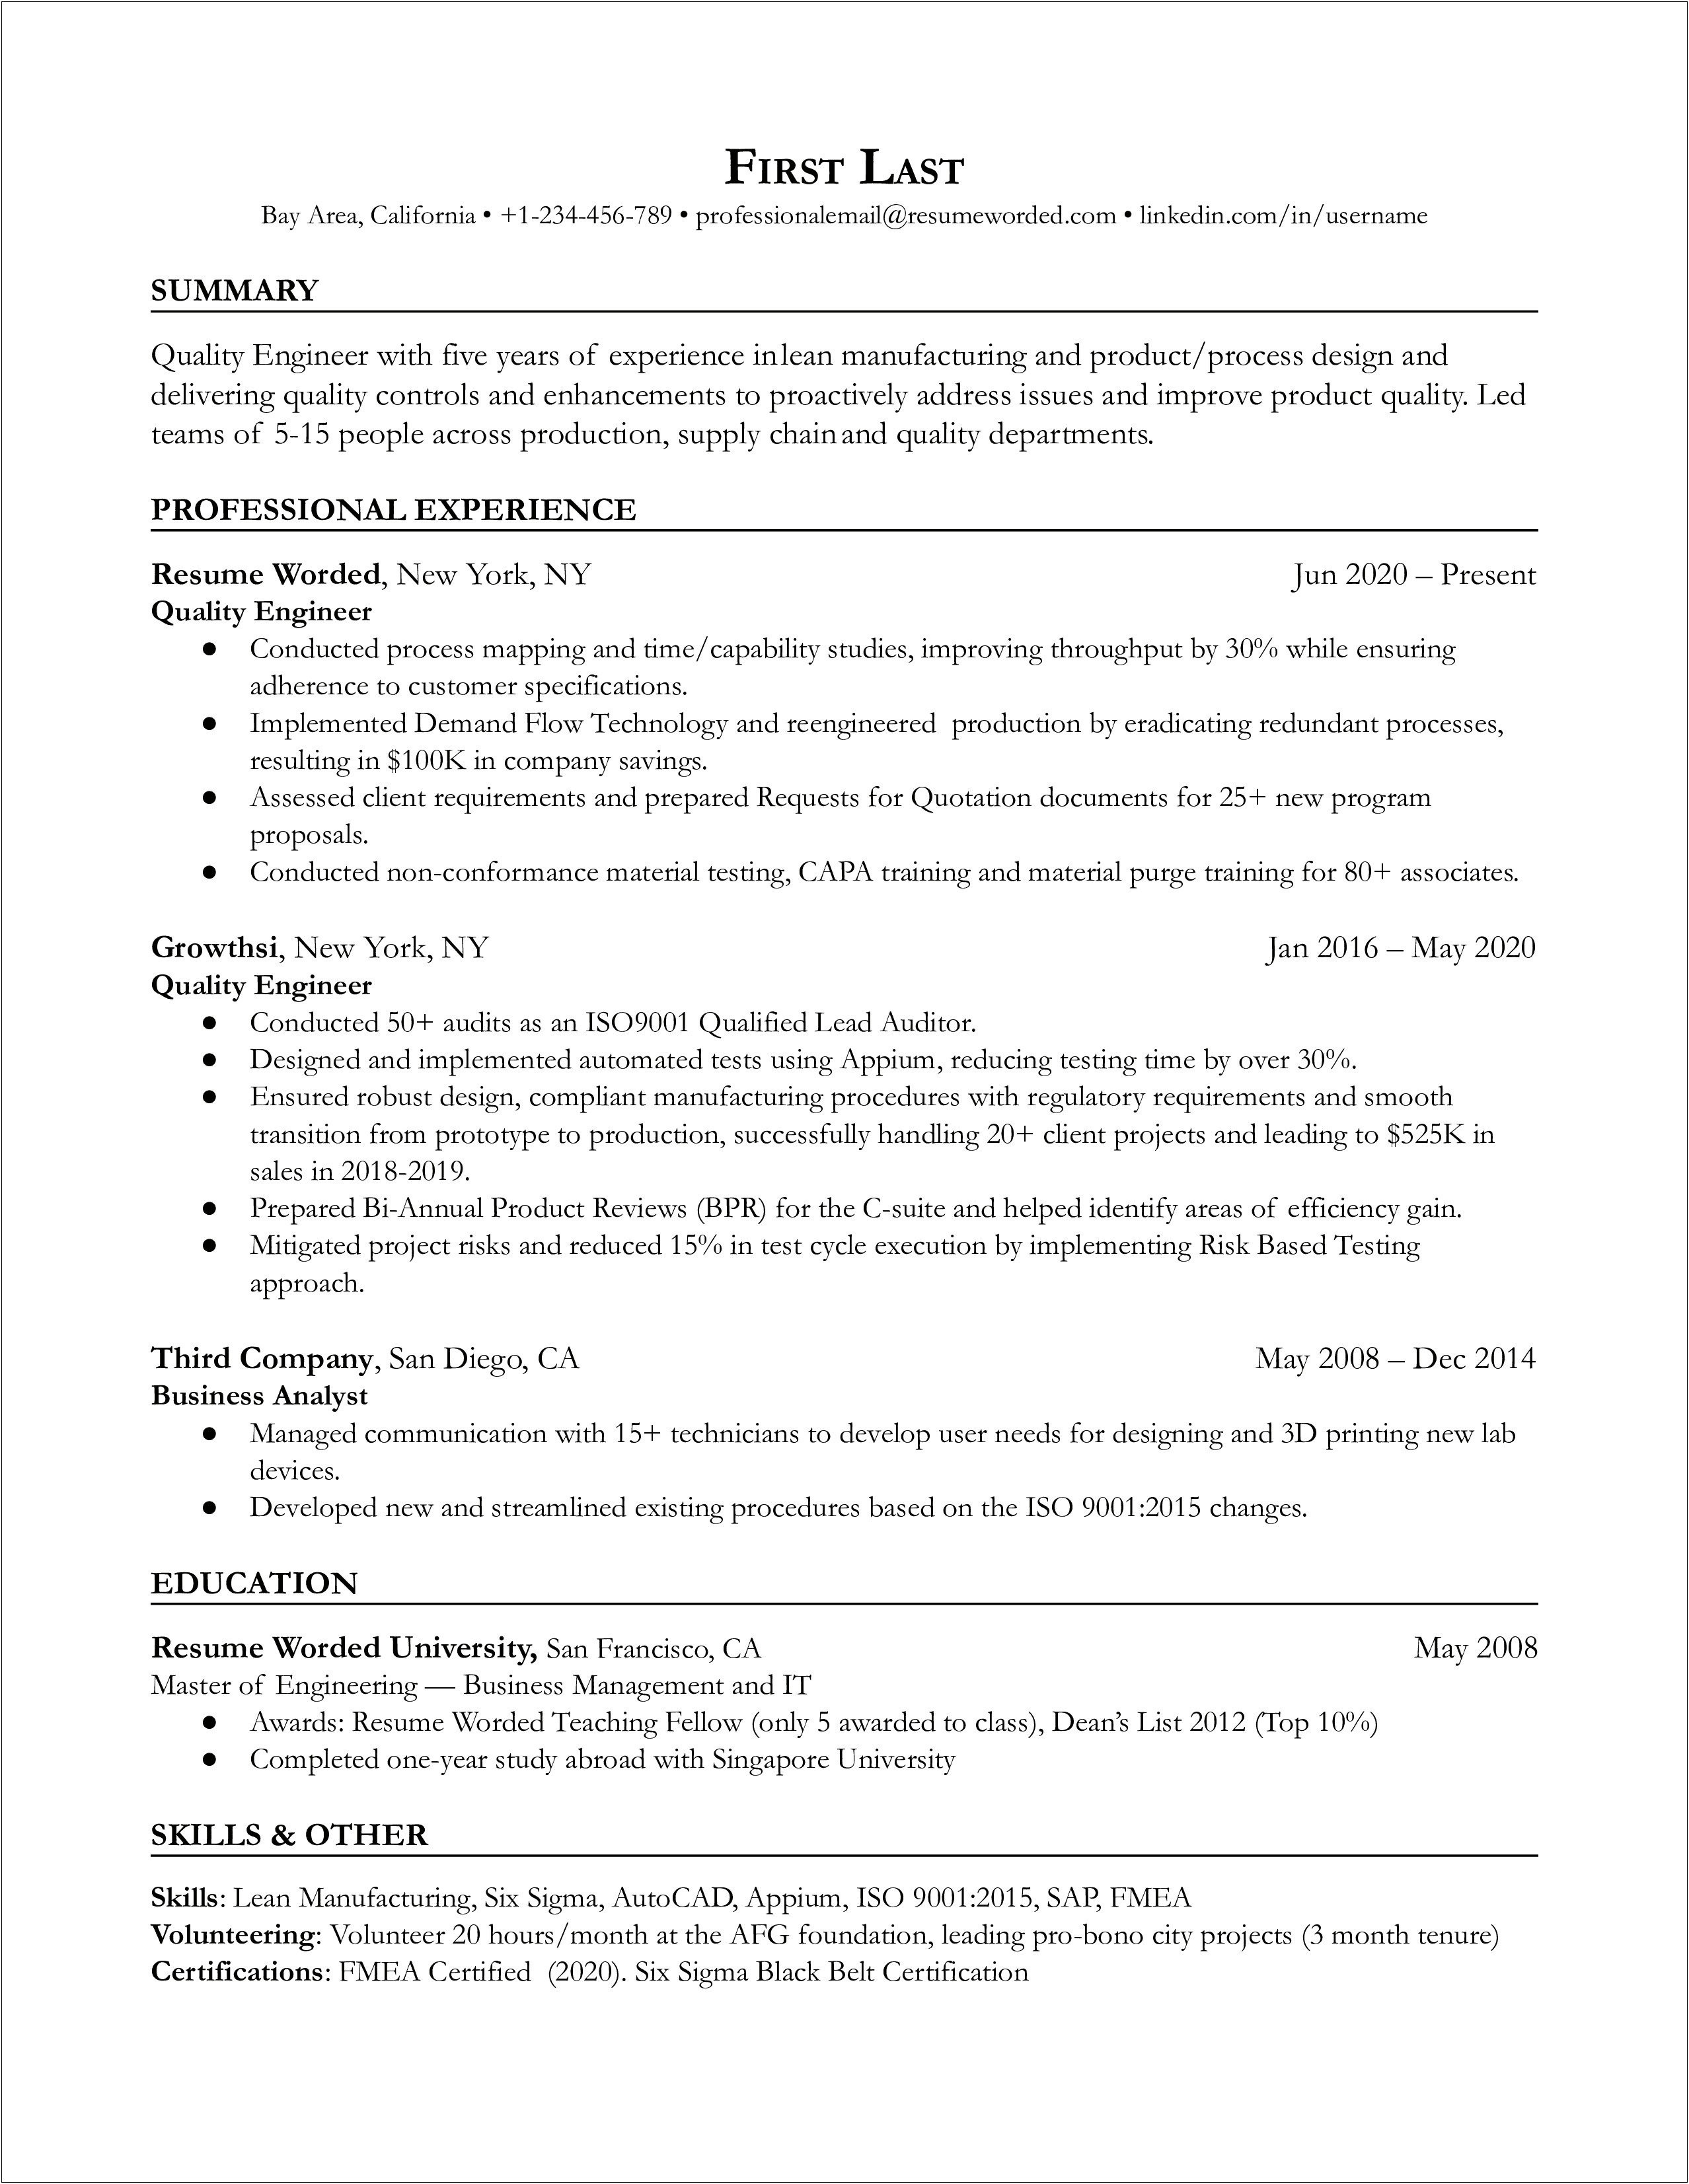 World Class Manufacturing Test Technician Resume Samples